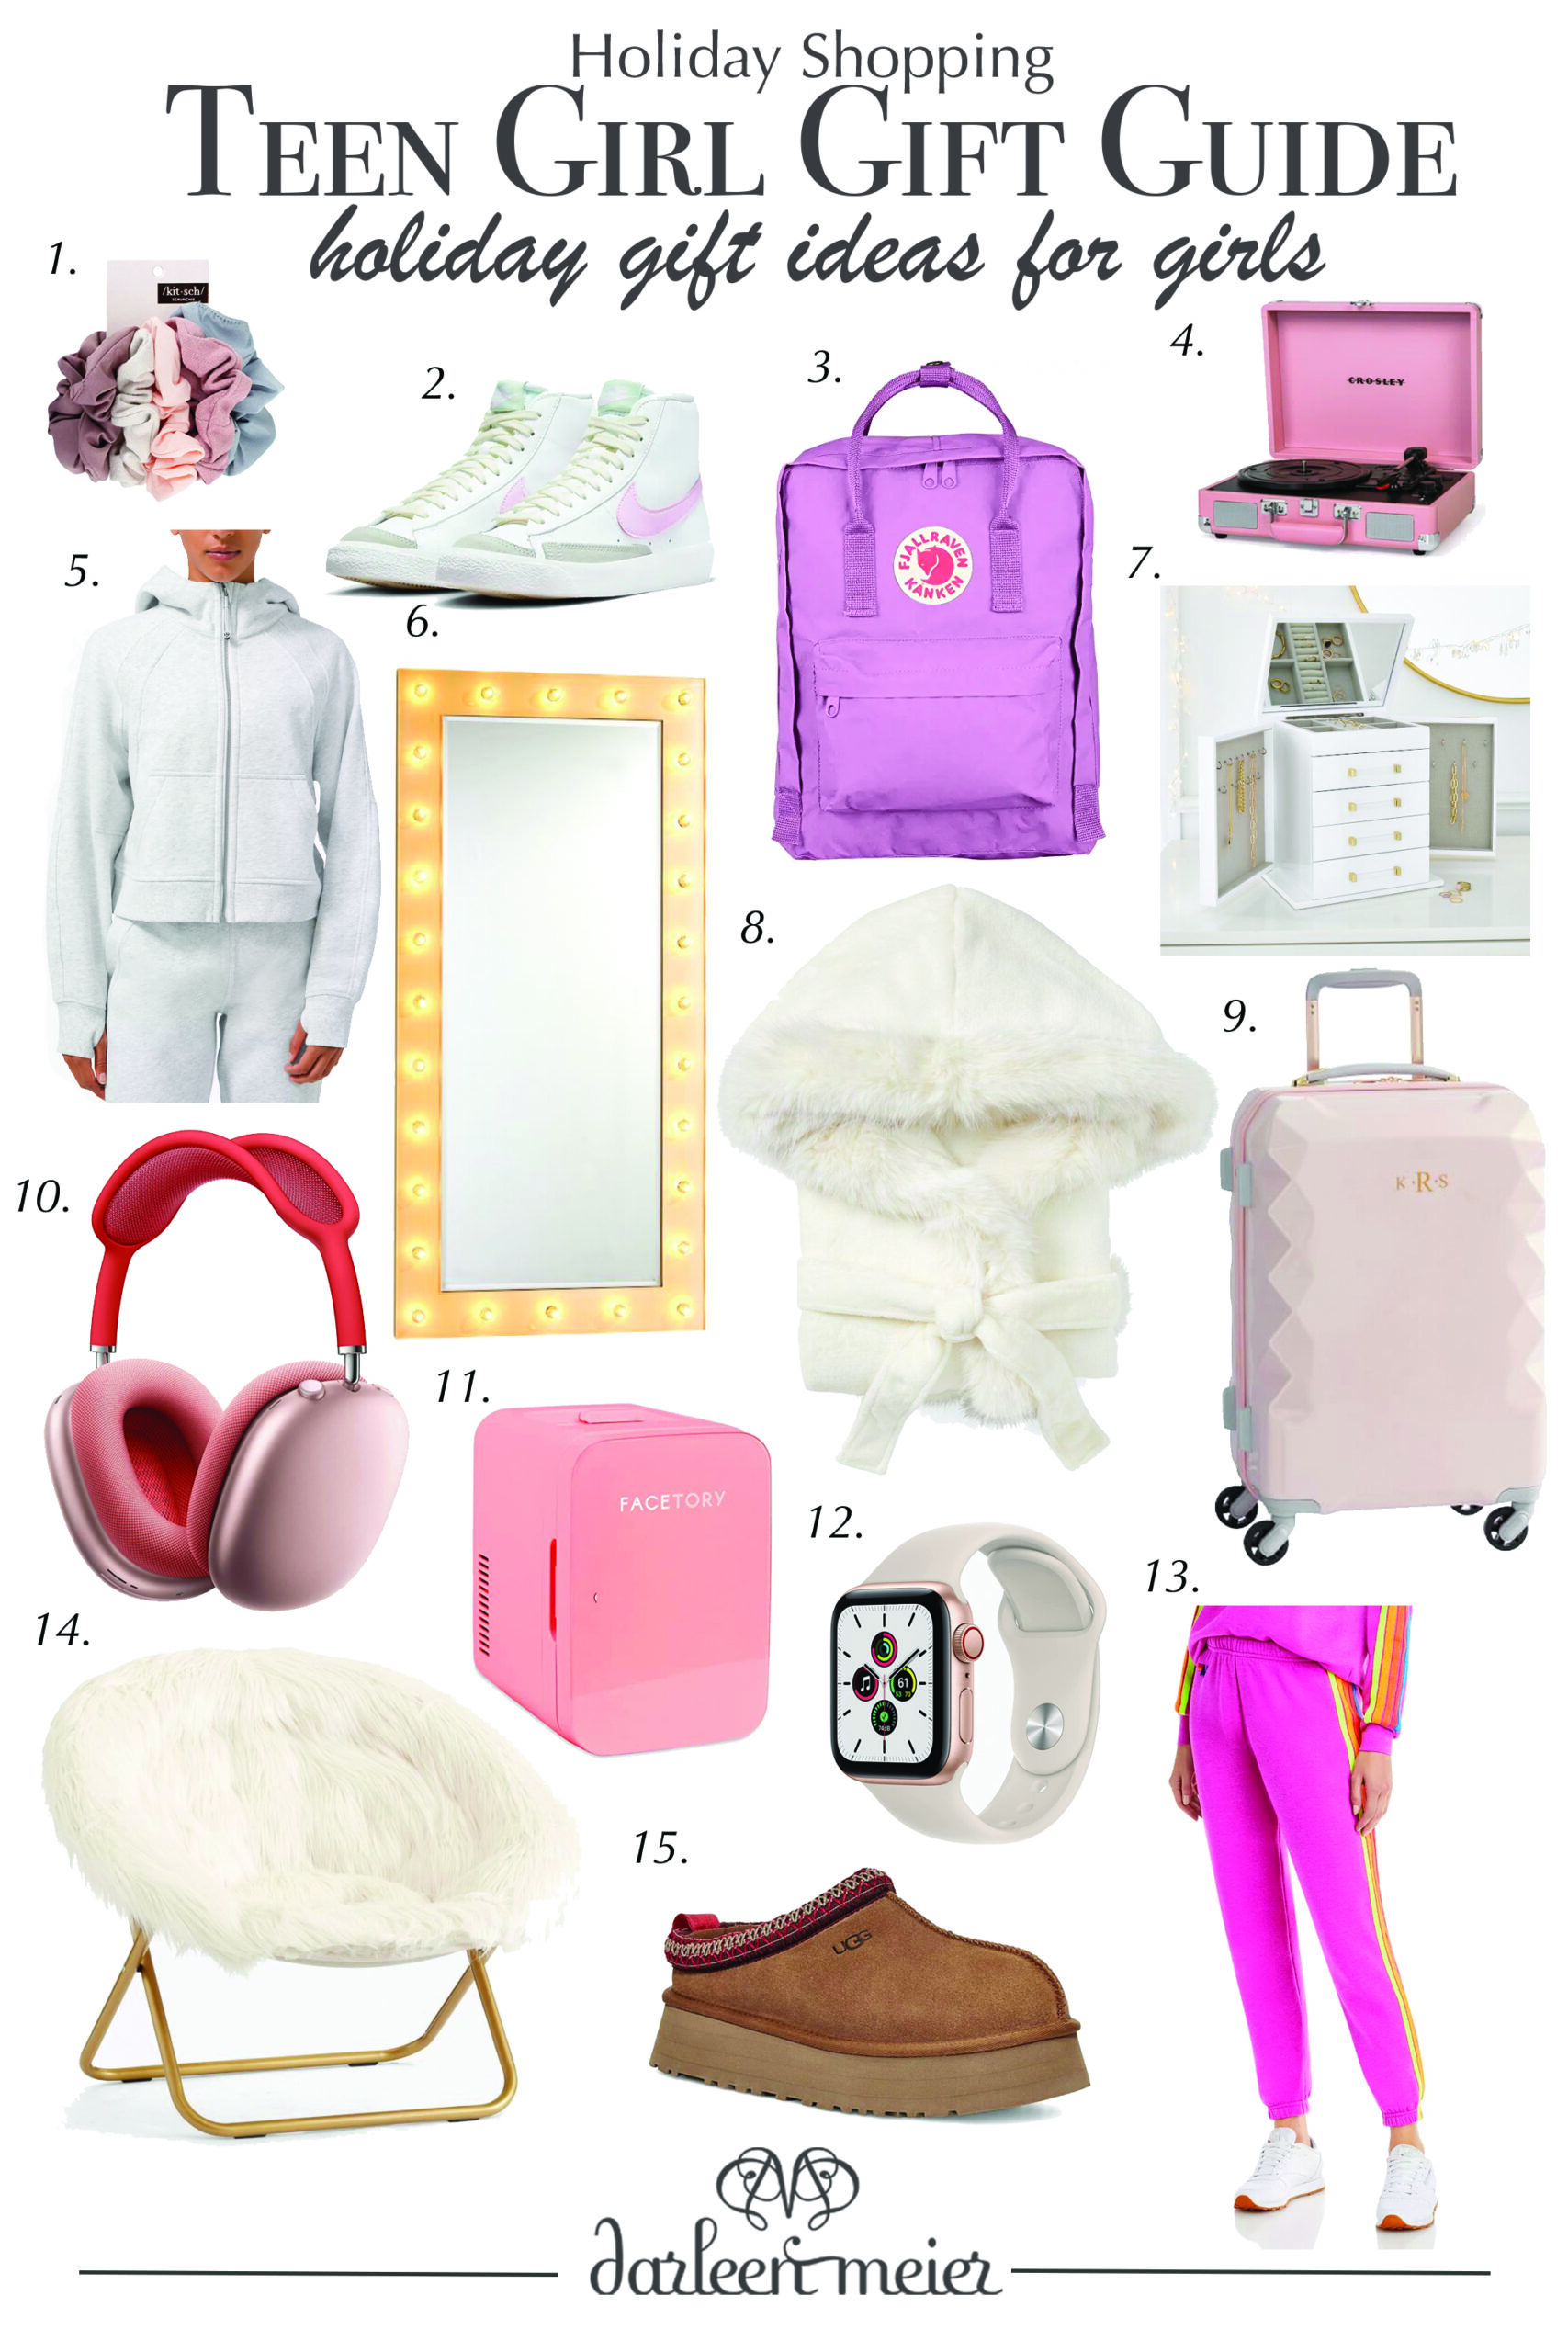 Find the perfect gift in this Holiday Shopping gift ideas list for Teen Girls in this Teen Girl gift guide. Perfect to put under the tree! || Darling Darleen Top CT Lifestyle Blogger